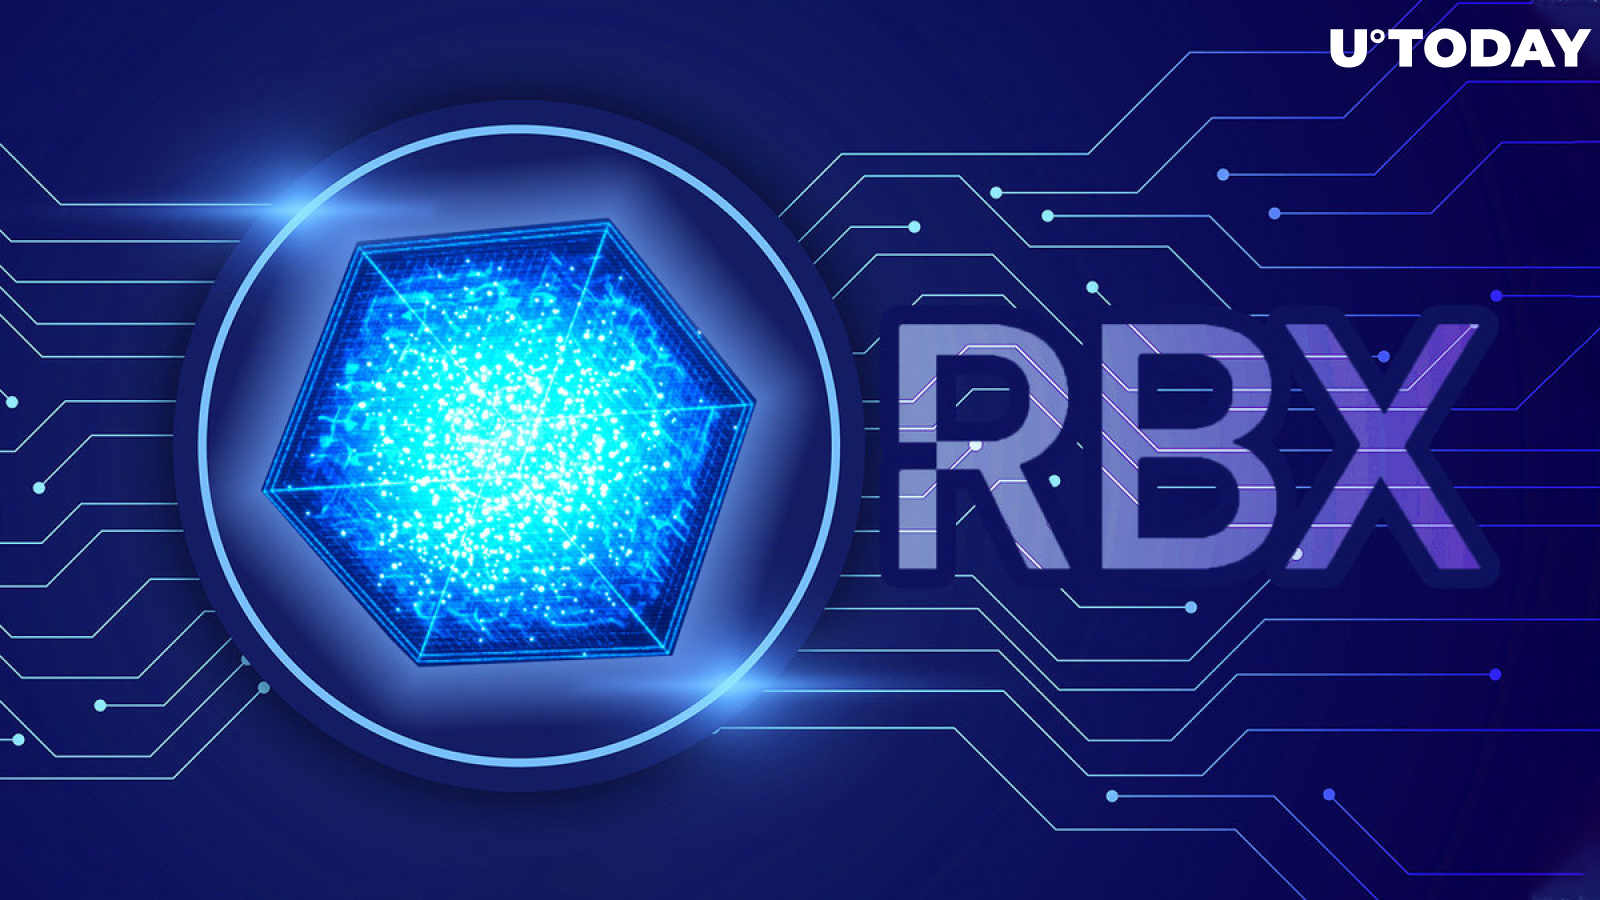 ReserveBlock RBX Network Introduces Novel Features, Offers On-Chain Escrow and In-Wallet Recovery